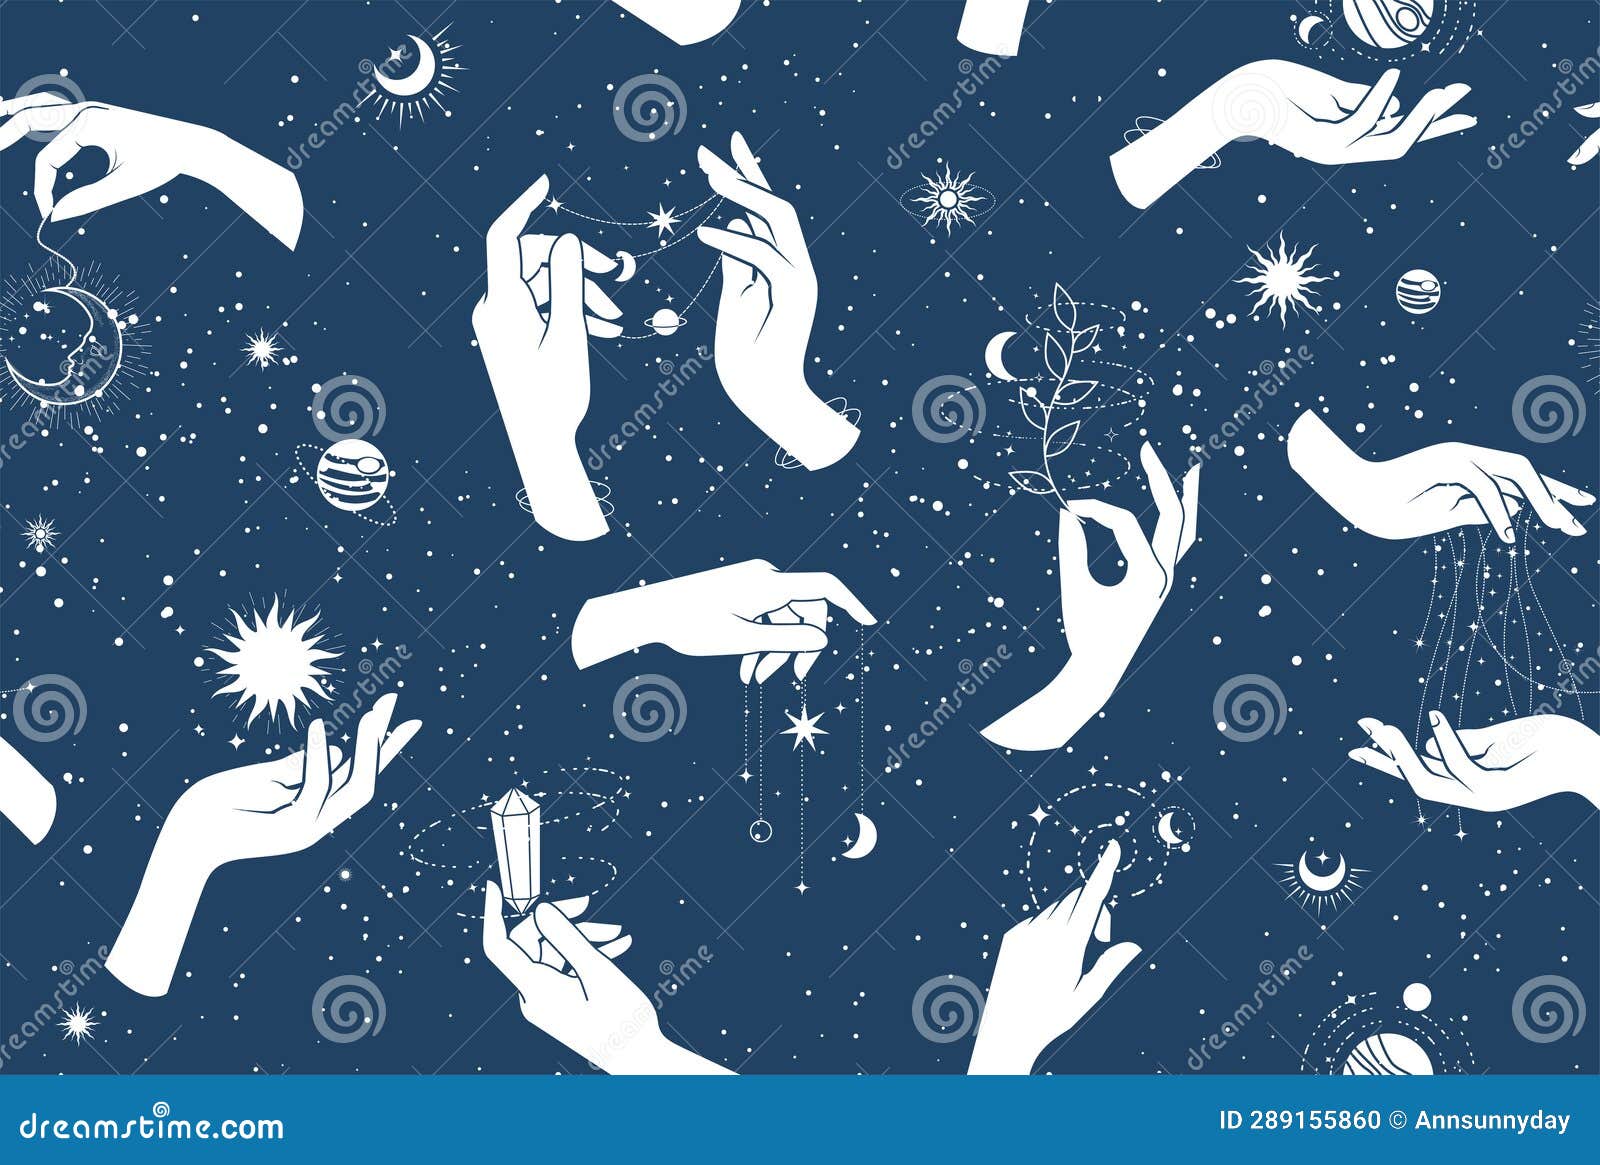 witch hands, magic tarot seamless pattern, wizardry and fortune-telling, sorcery and witchcraft background, magic spells